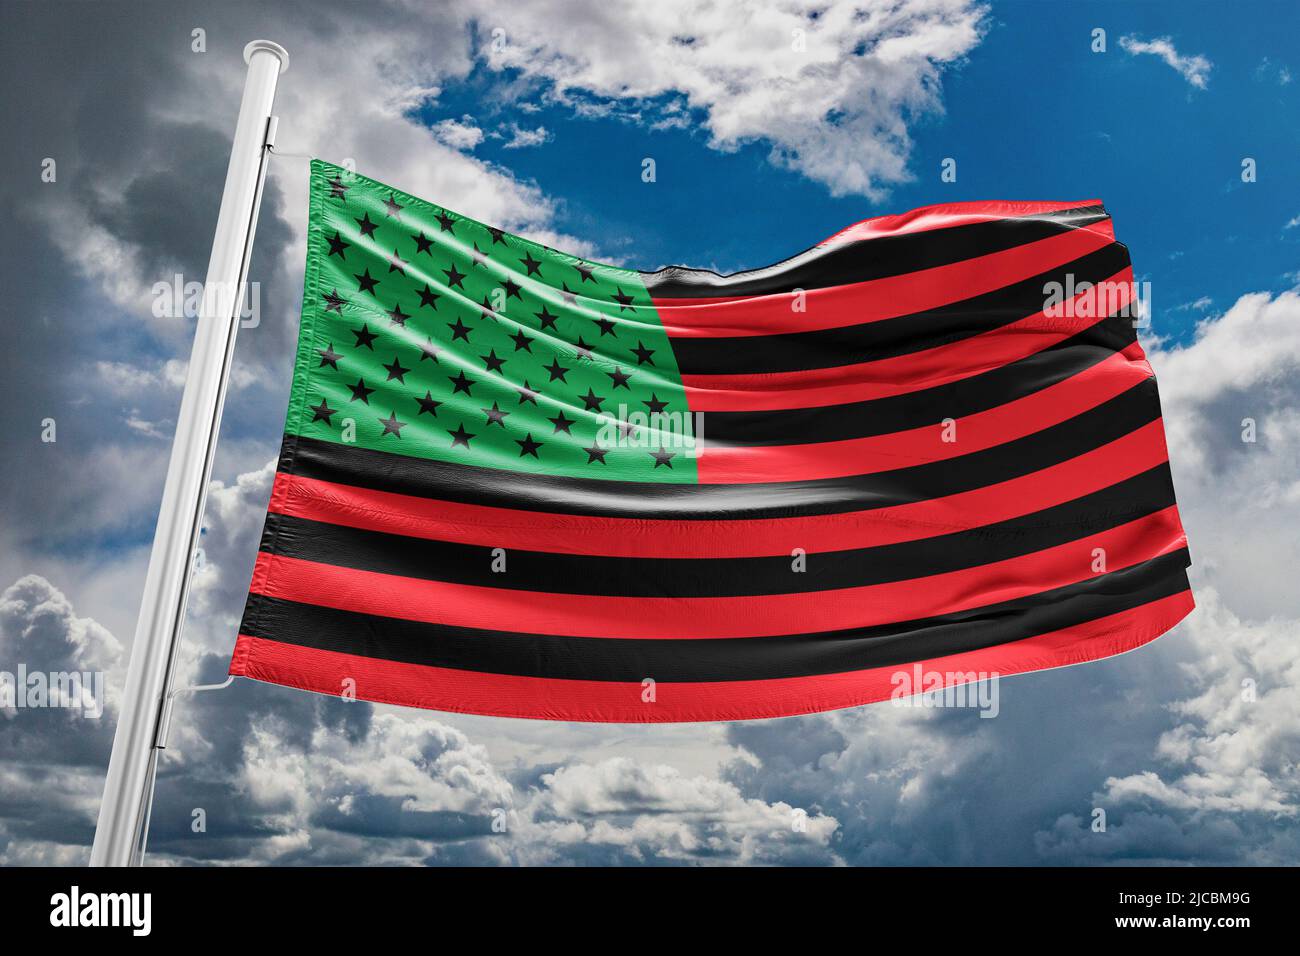 juneteenth Symbolic Behind the Pan-African Flag African American flag typically referred to as the RBG flag. Red representing the blood of African A Stock Photo